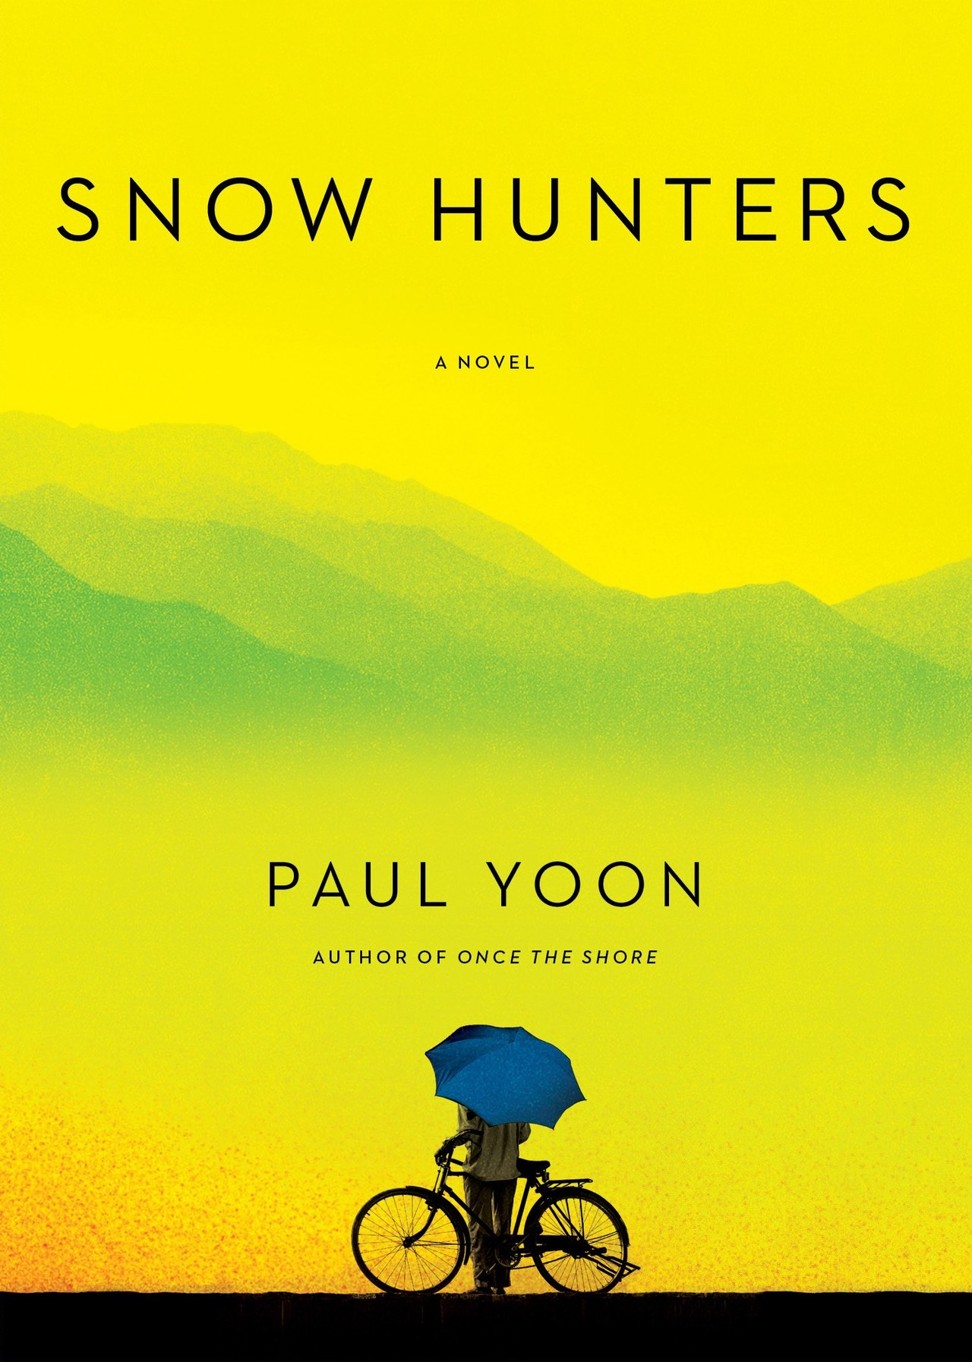 The cover of Paul Yoon’s novel.